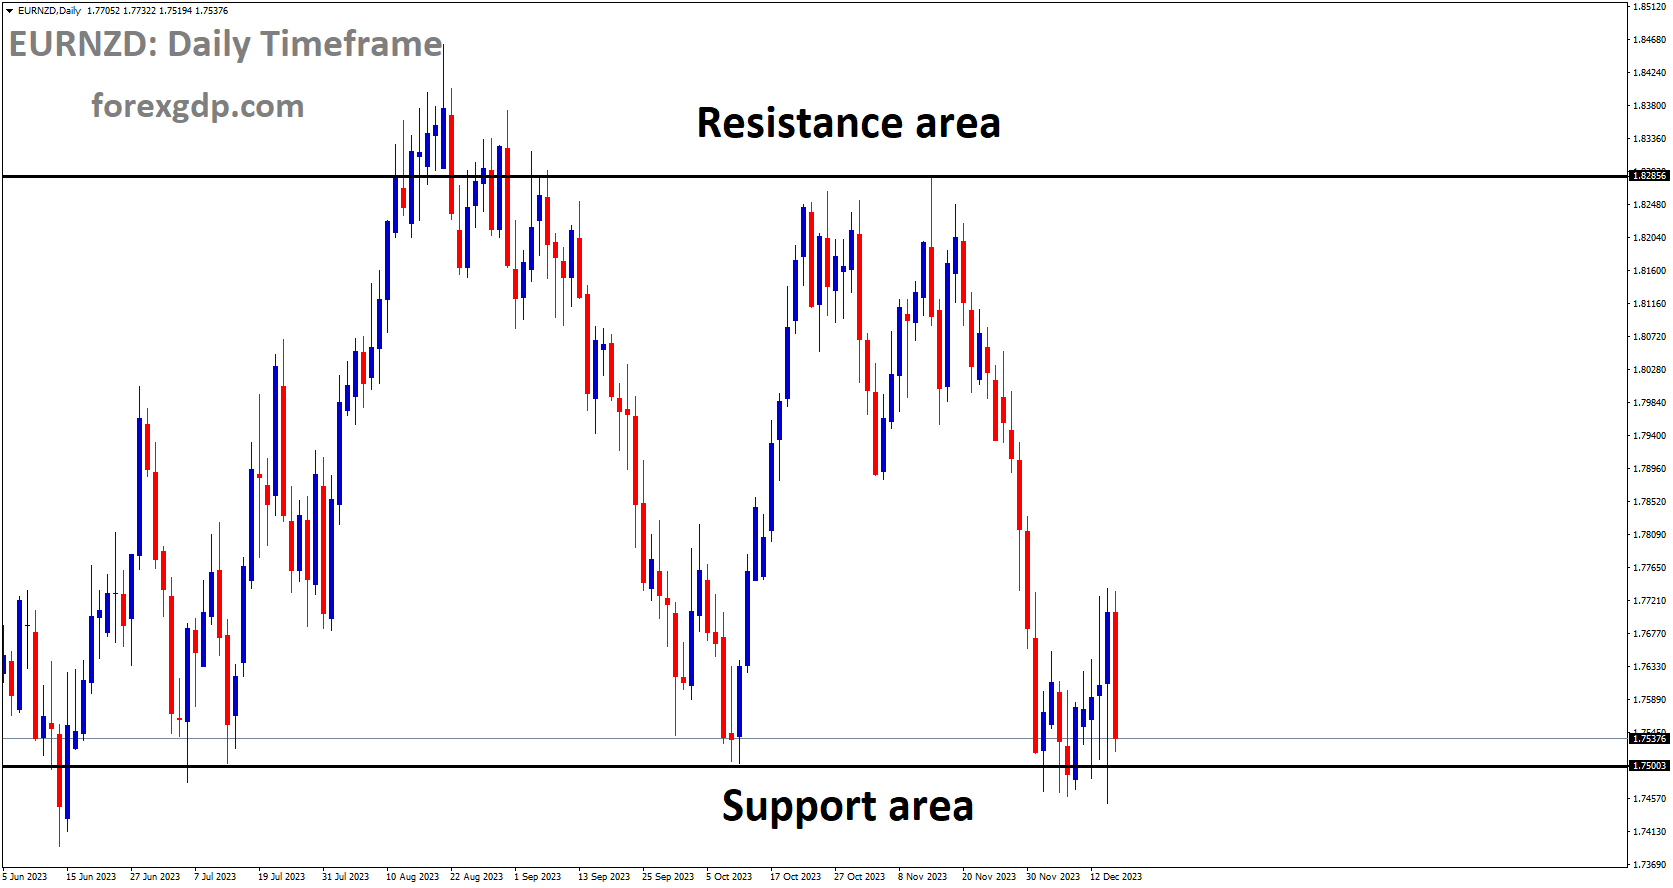 EURNZD is moving in box pattern and market has reached support area of the pattern